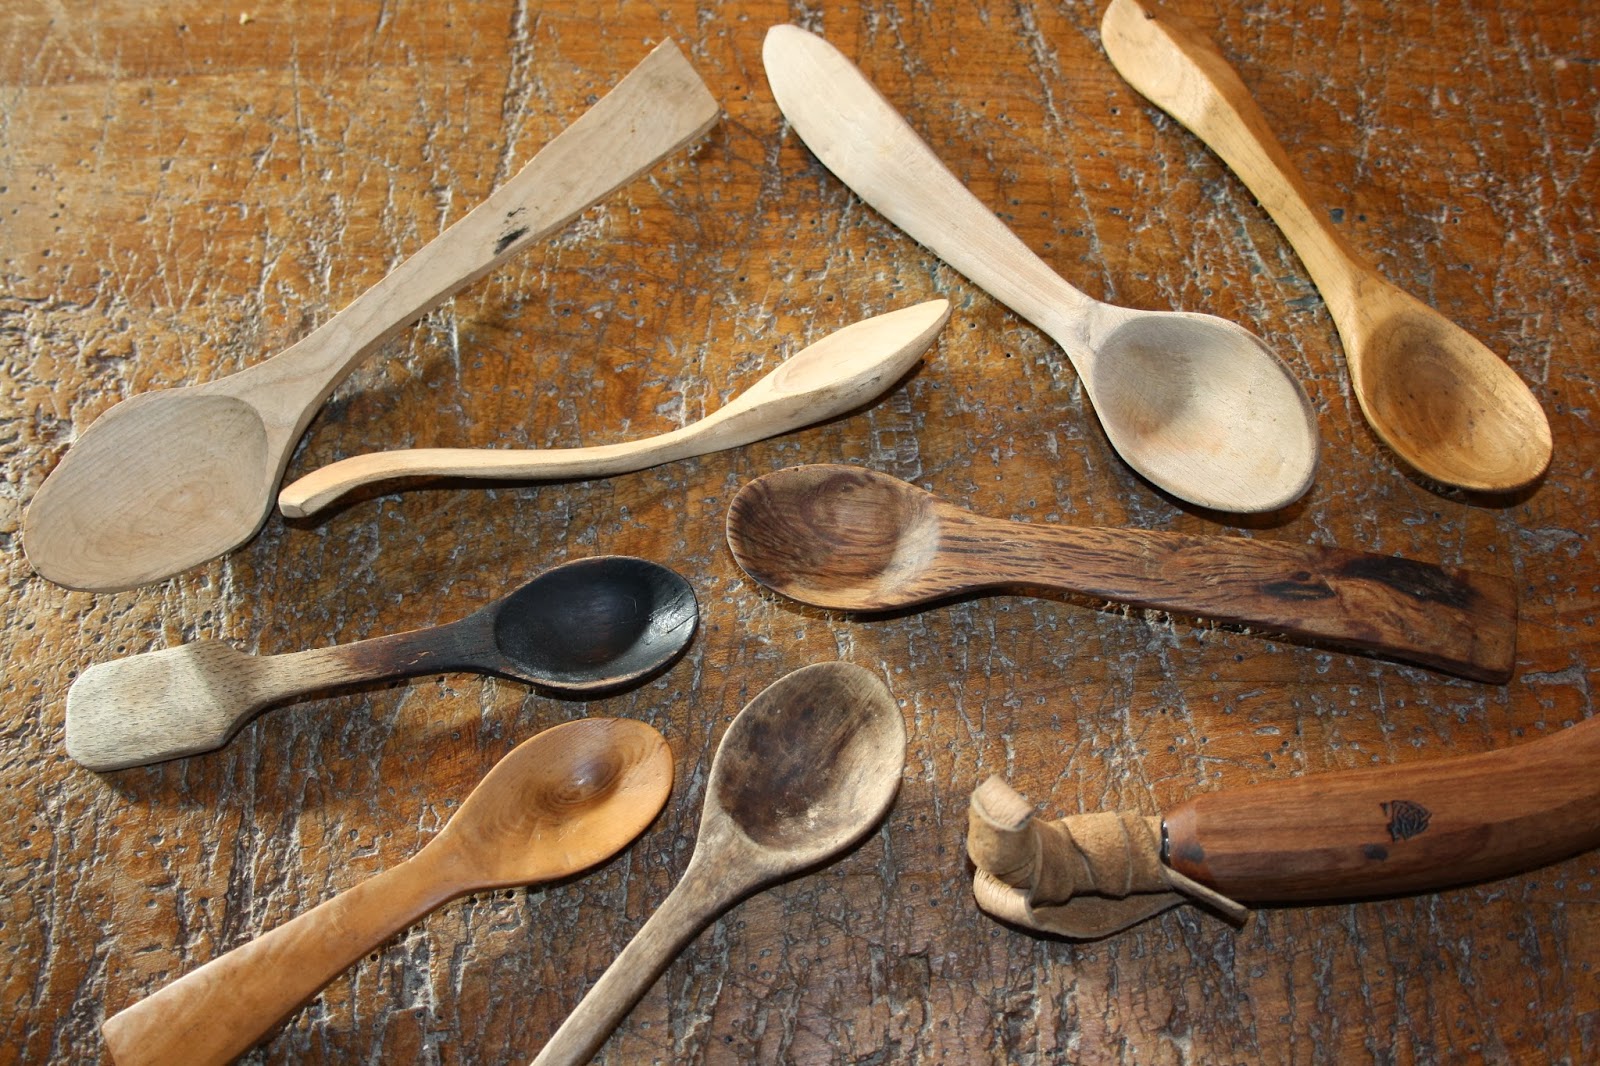 Wilderness Survival Skills - Joe O'Leary: If spoons could talk...